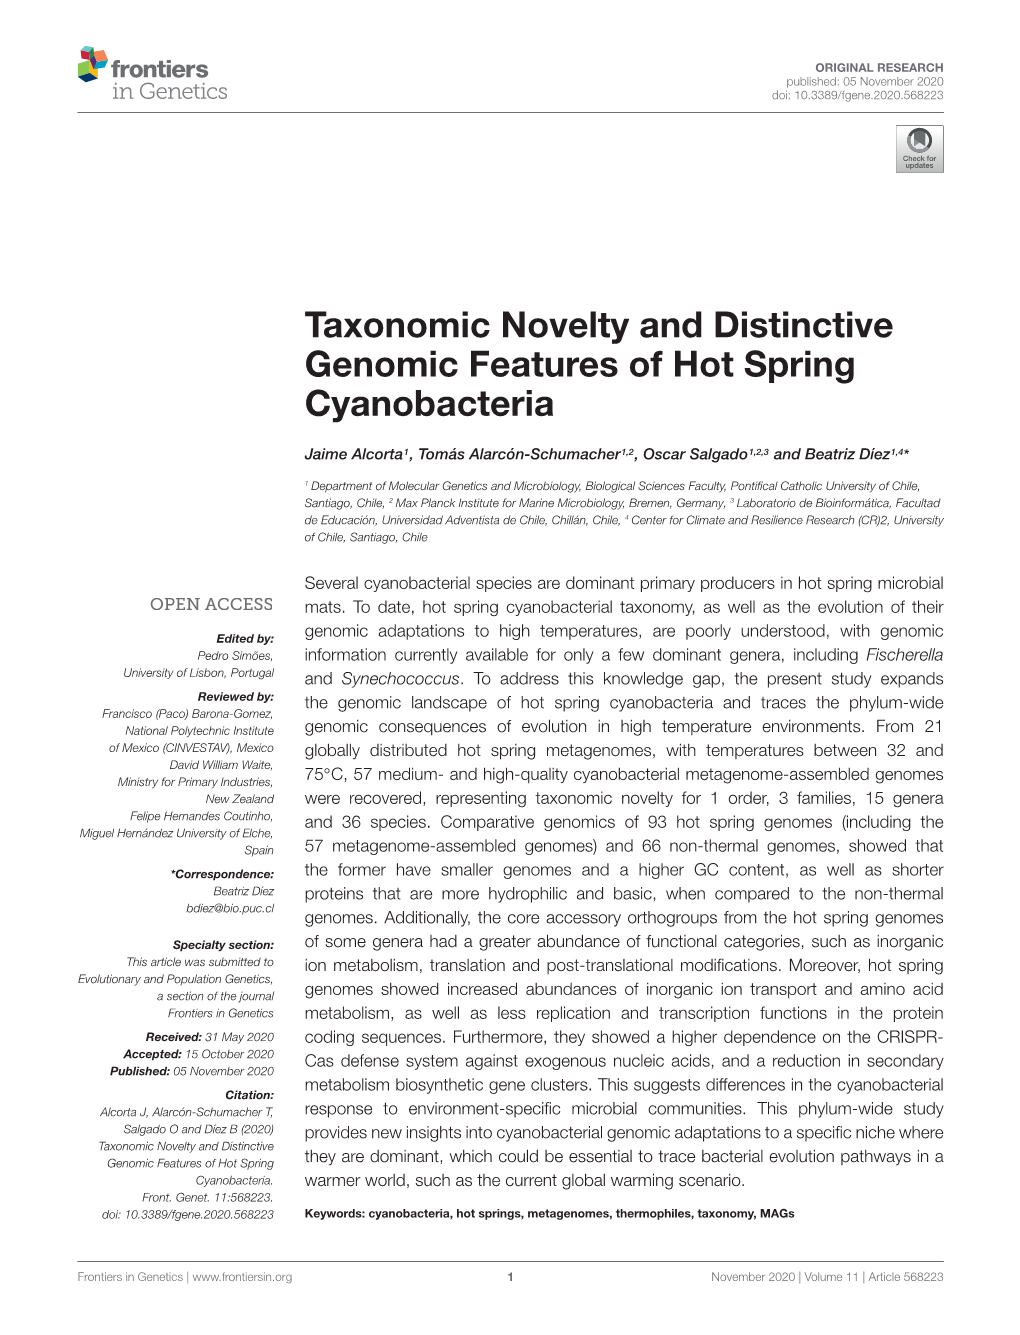 Taxonomic Novelty and Distinctive Genomic Features of Hot Spring Cyanobacteria